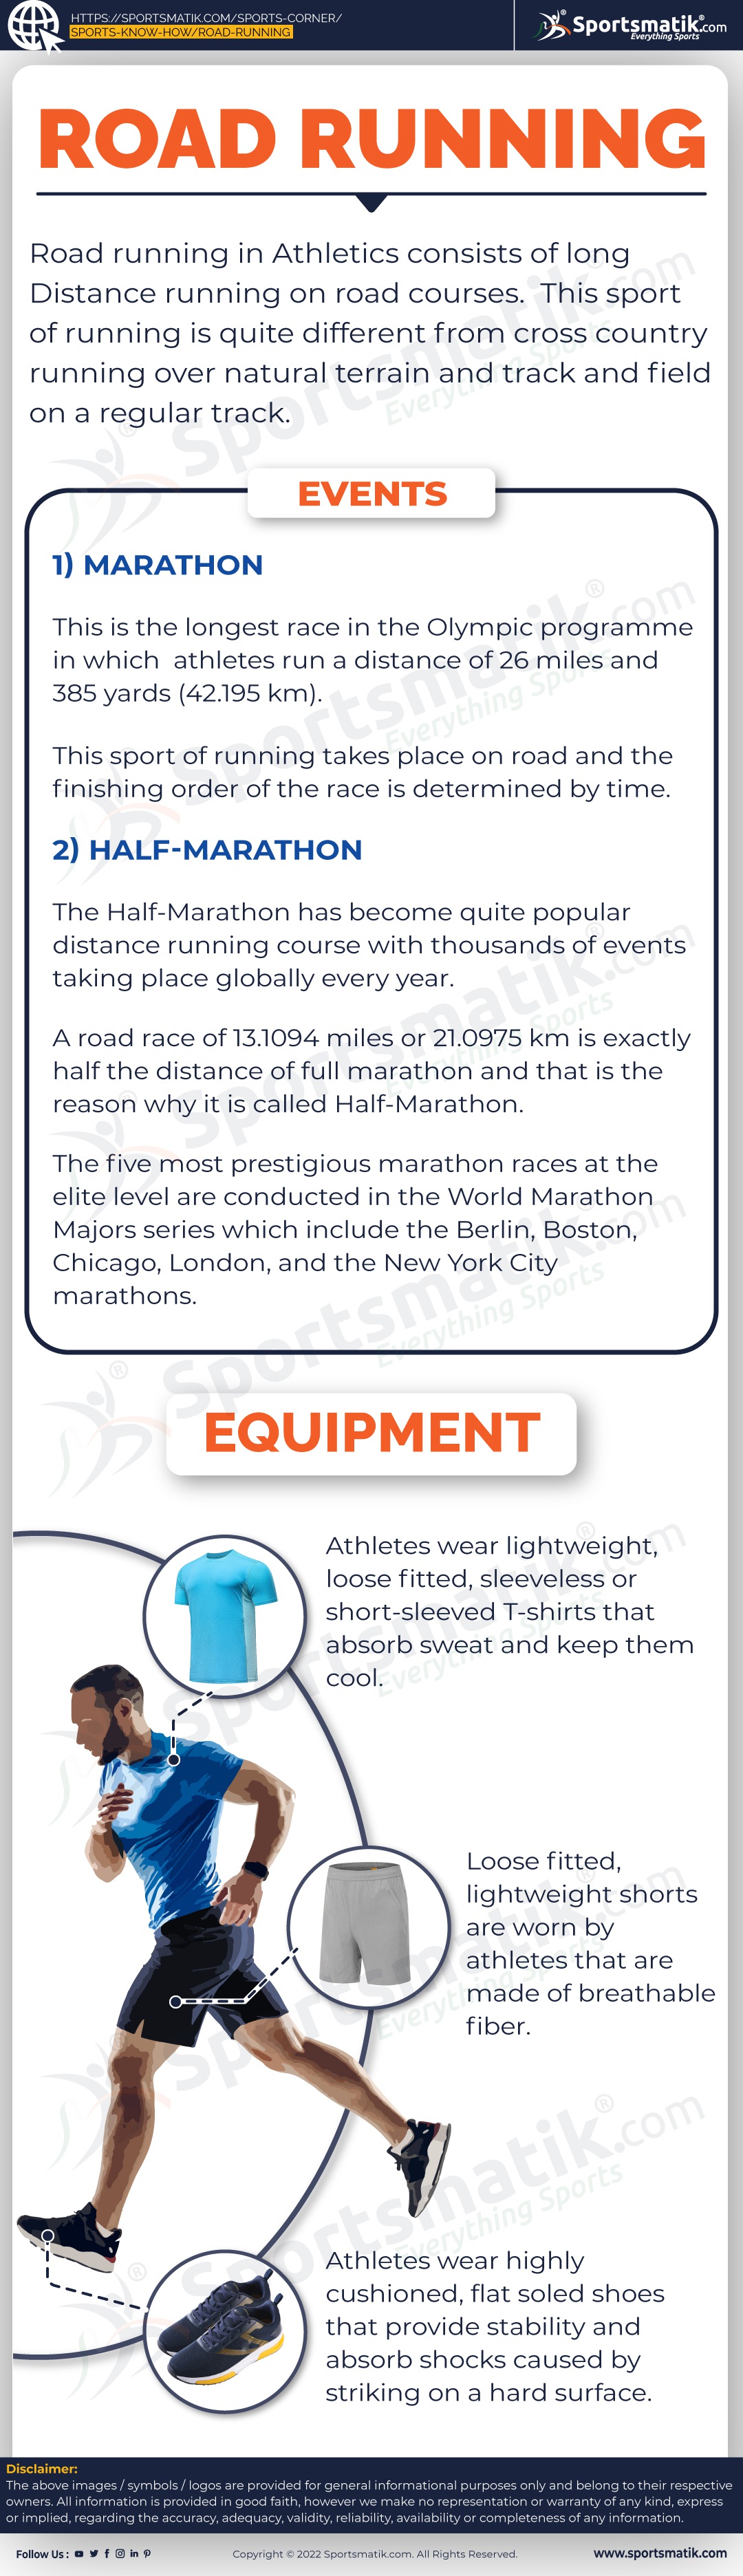 Road Running Equipment and Events